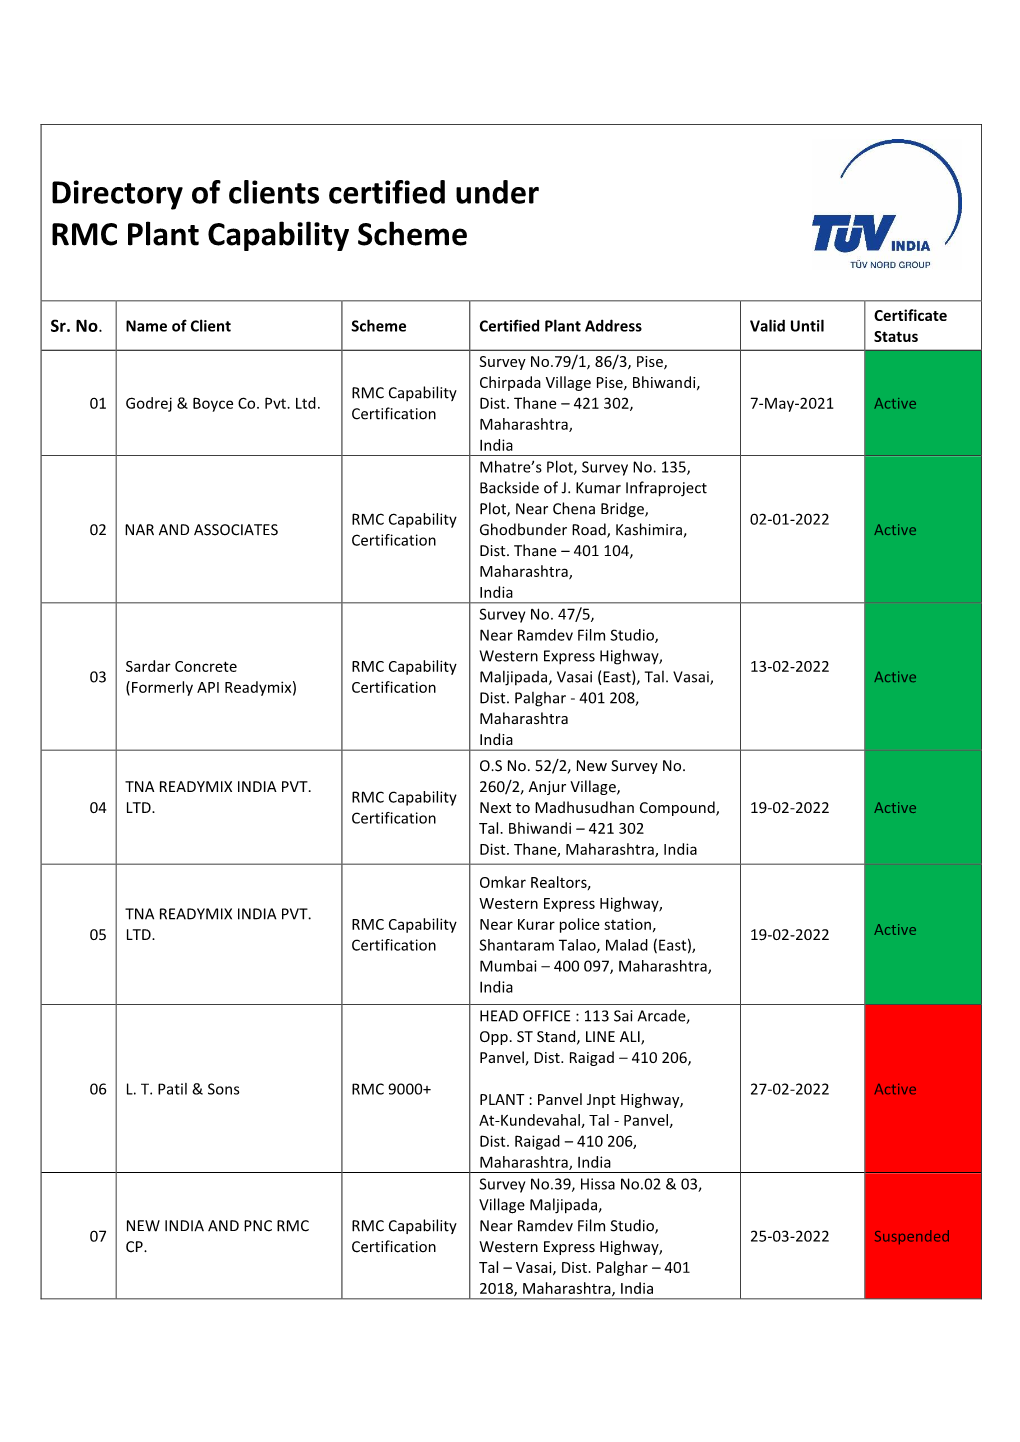 Directory of Clients Certified Under RMC Plant Capability Scheme